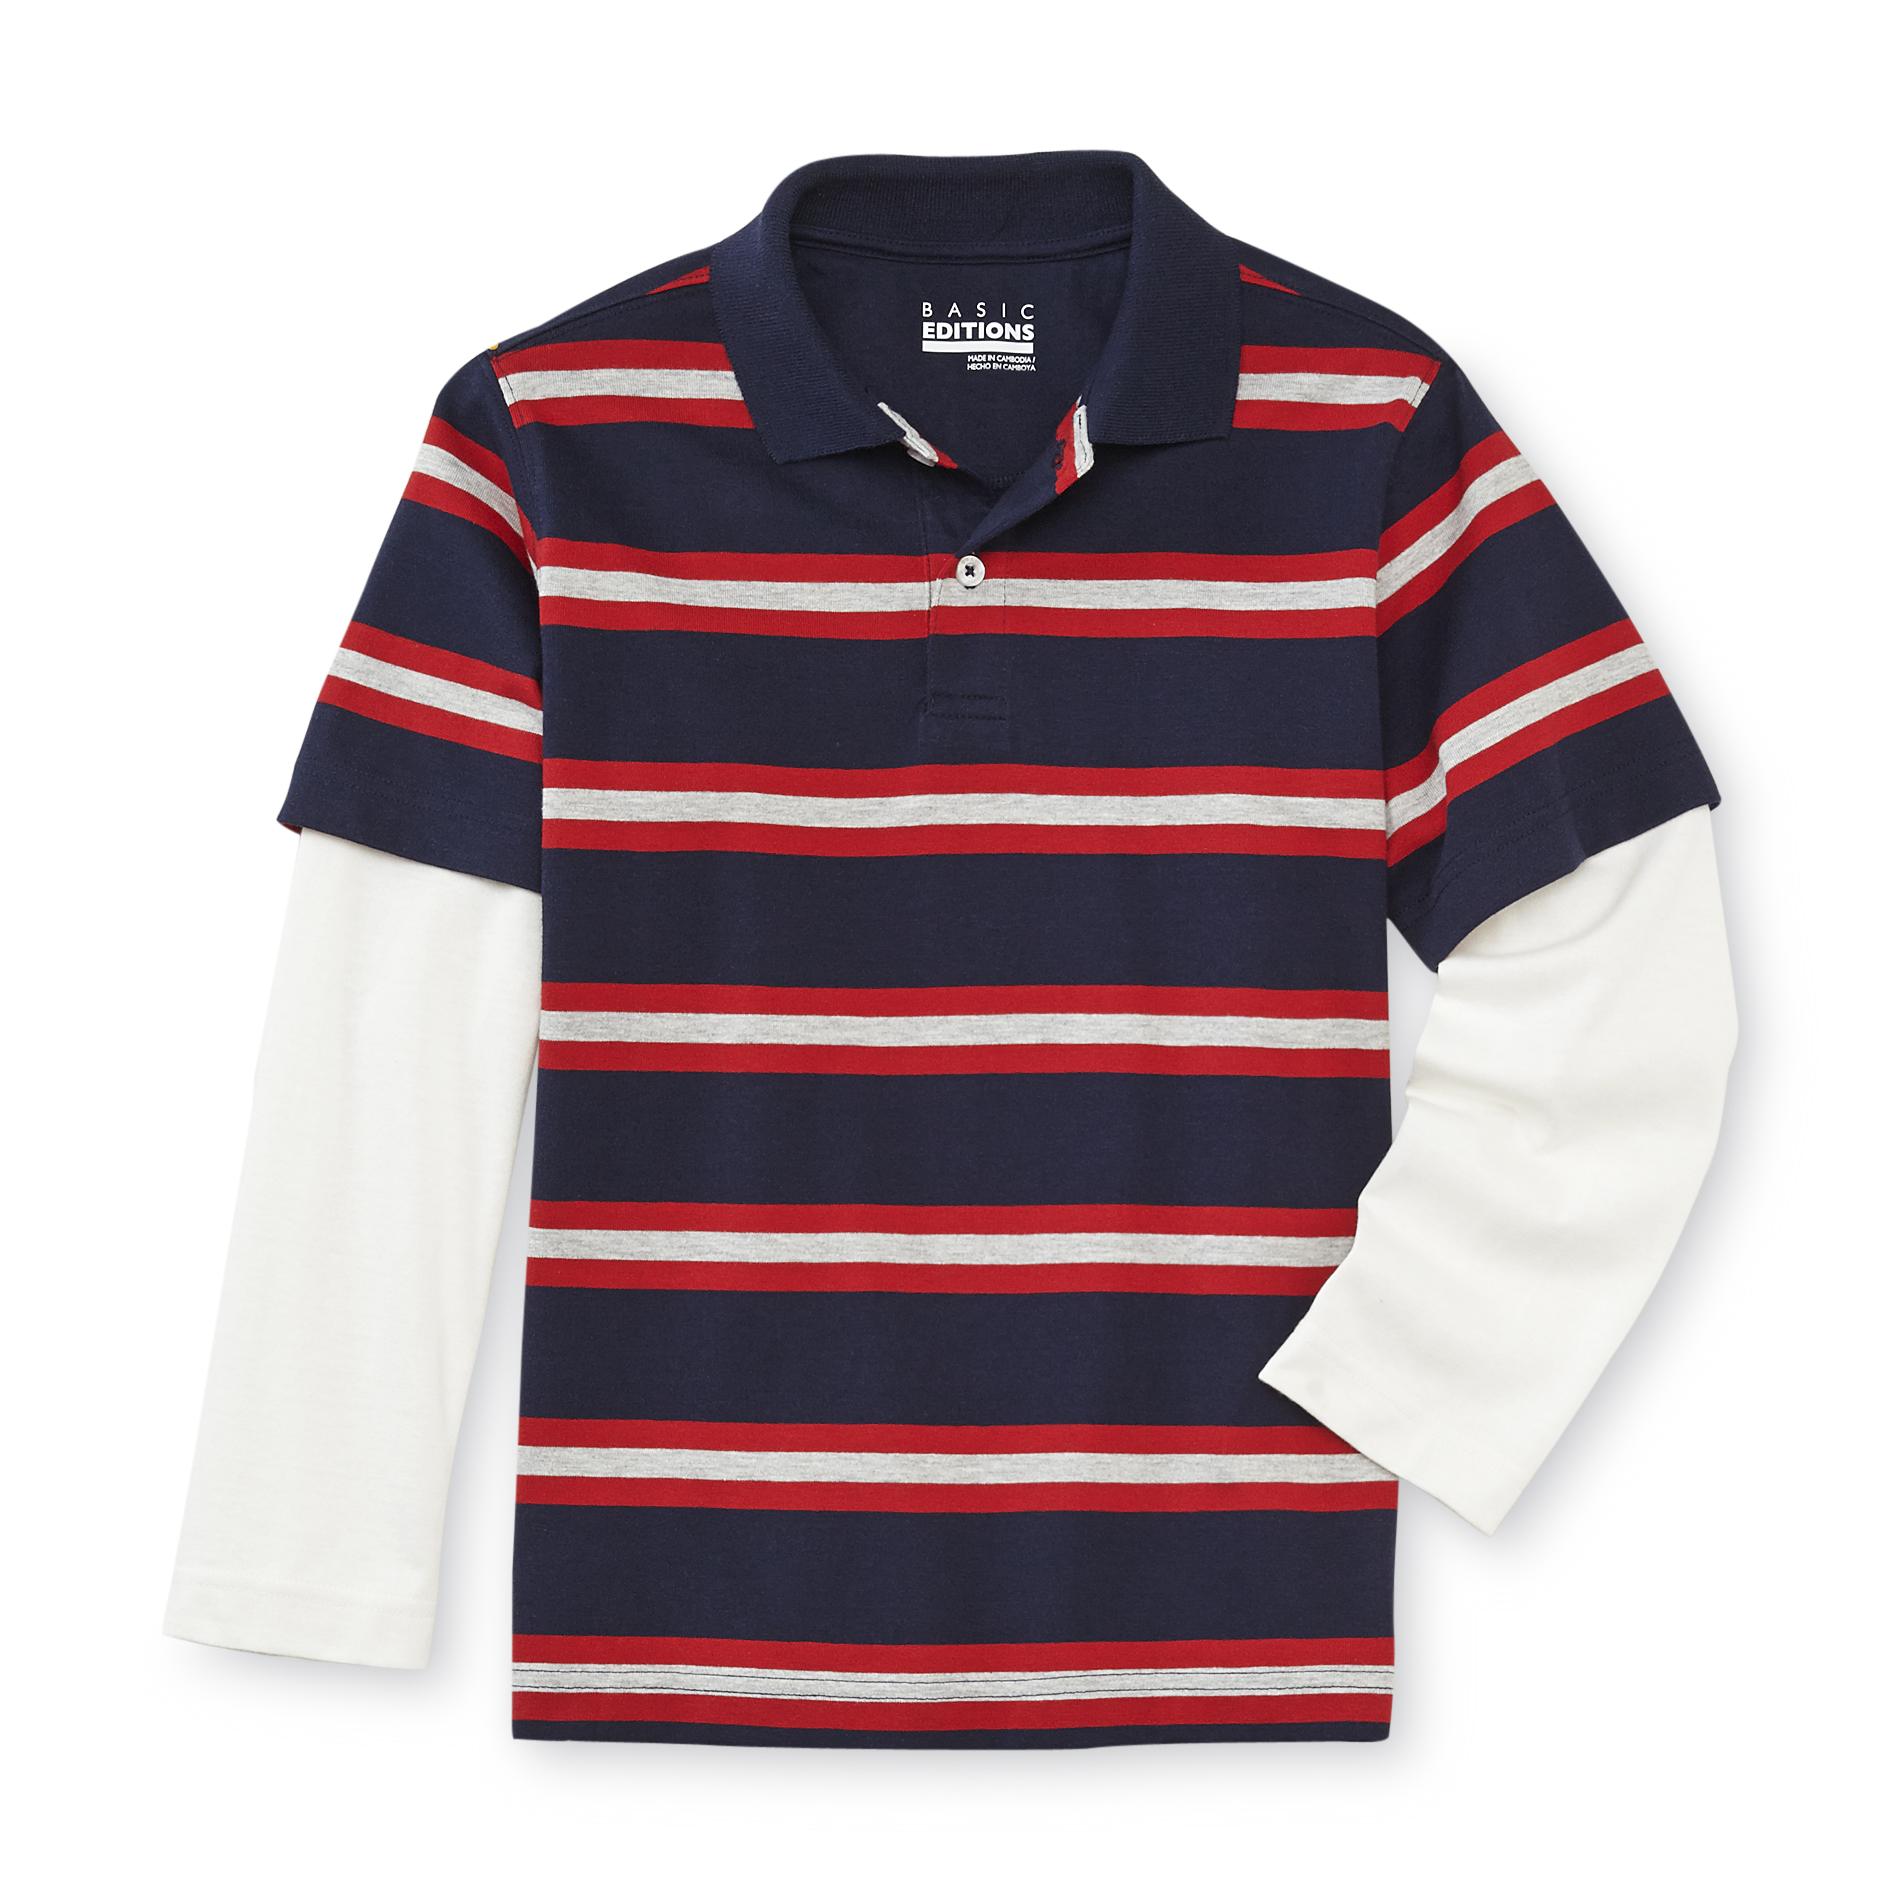 Basic Editions Boy's Layered-Look Polo Shirt - Striped